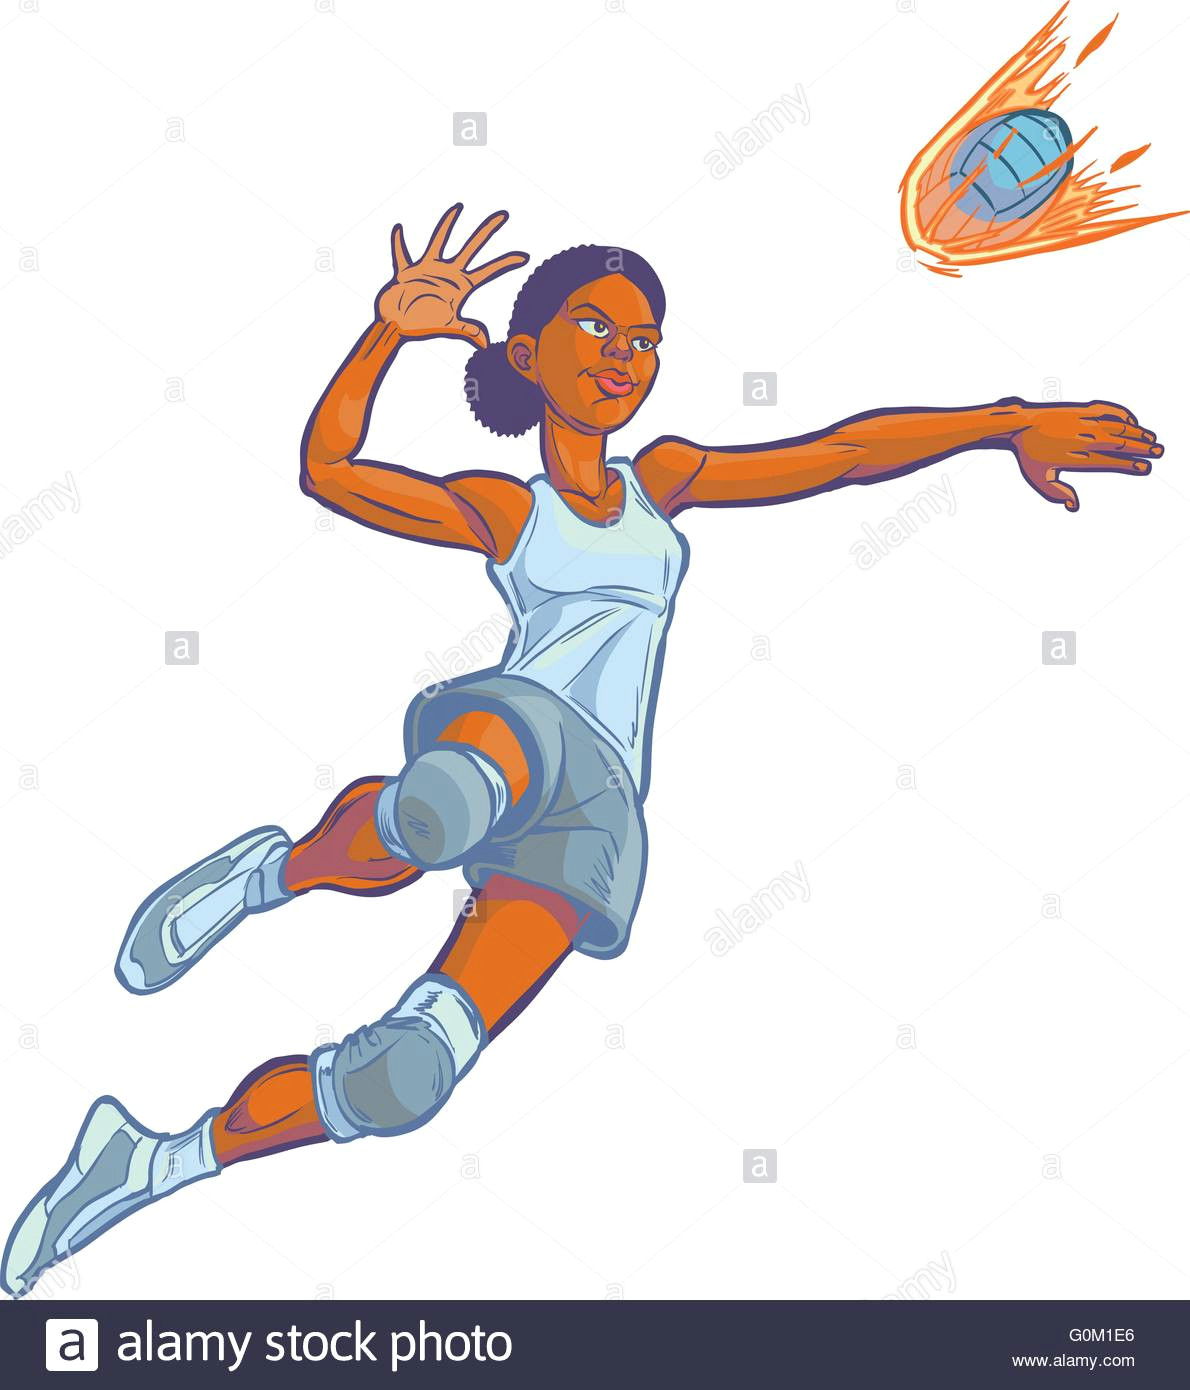 cartoon clip art illustration of an african american girl volleyball player jumping to spike an incoming